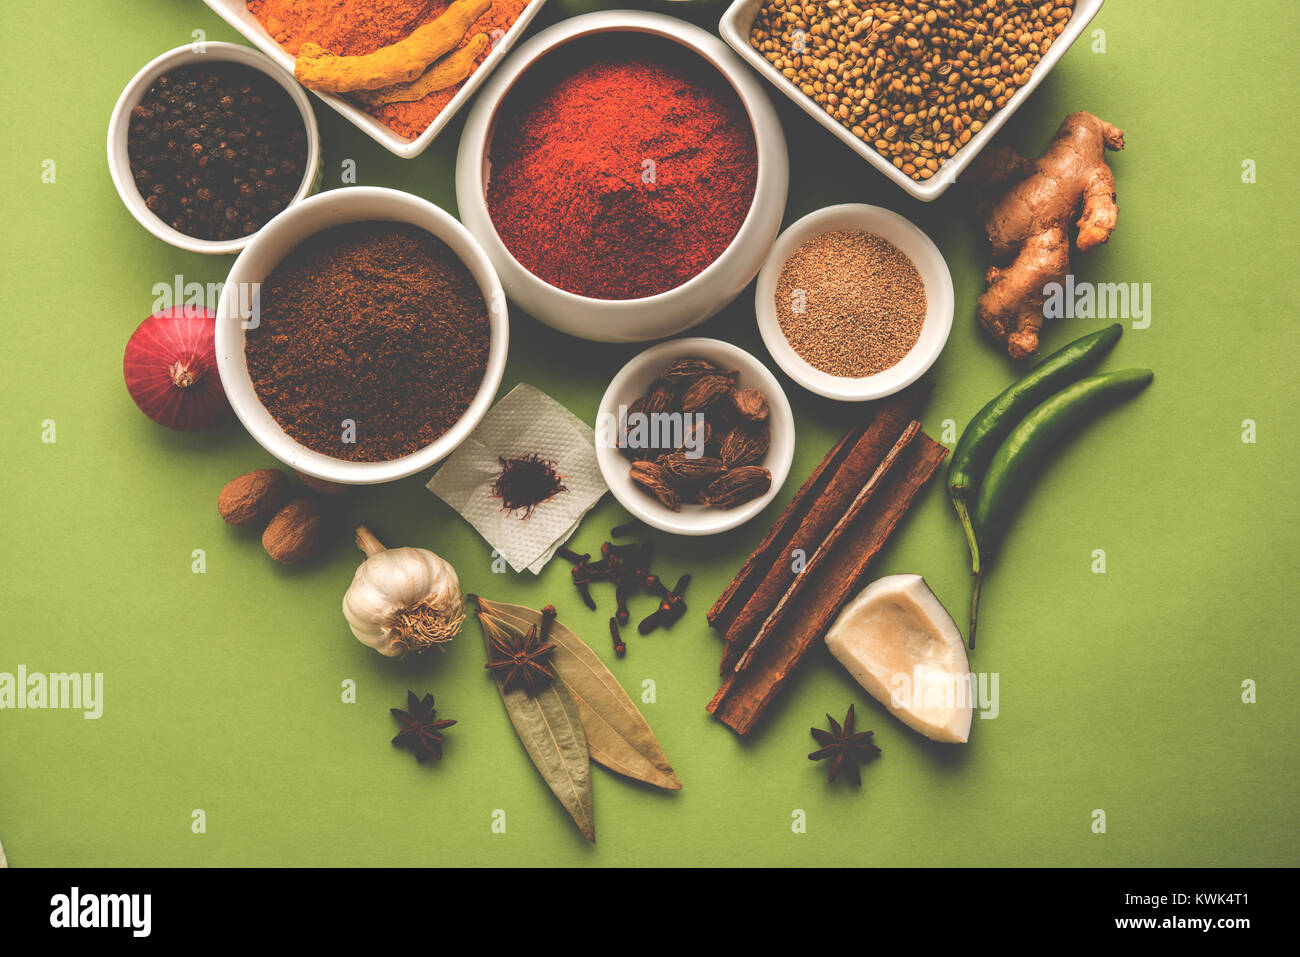 Raw Indian Spice Powder over red, green or yellow background, selective focus Stock Photo